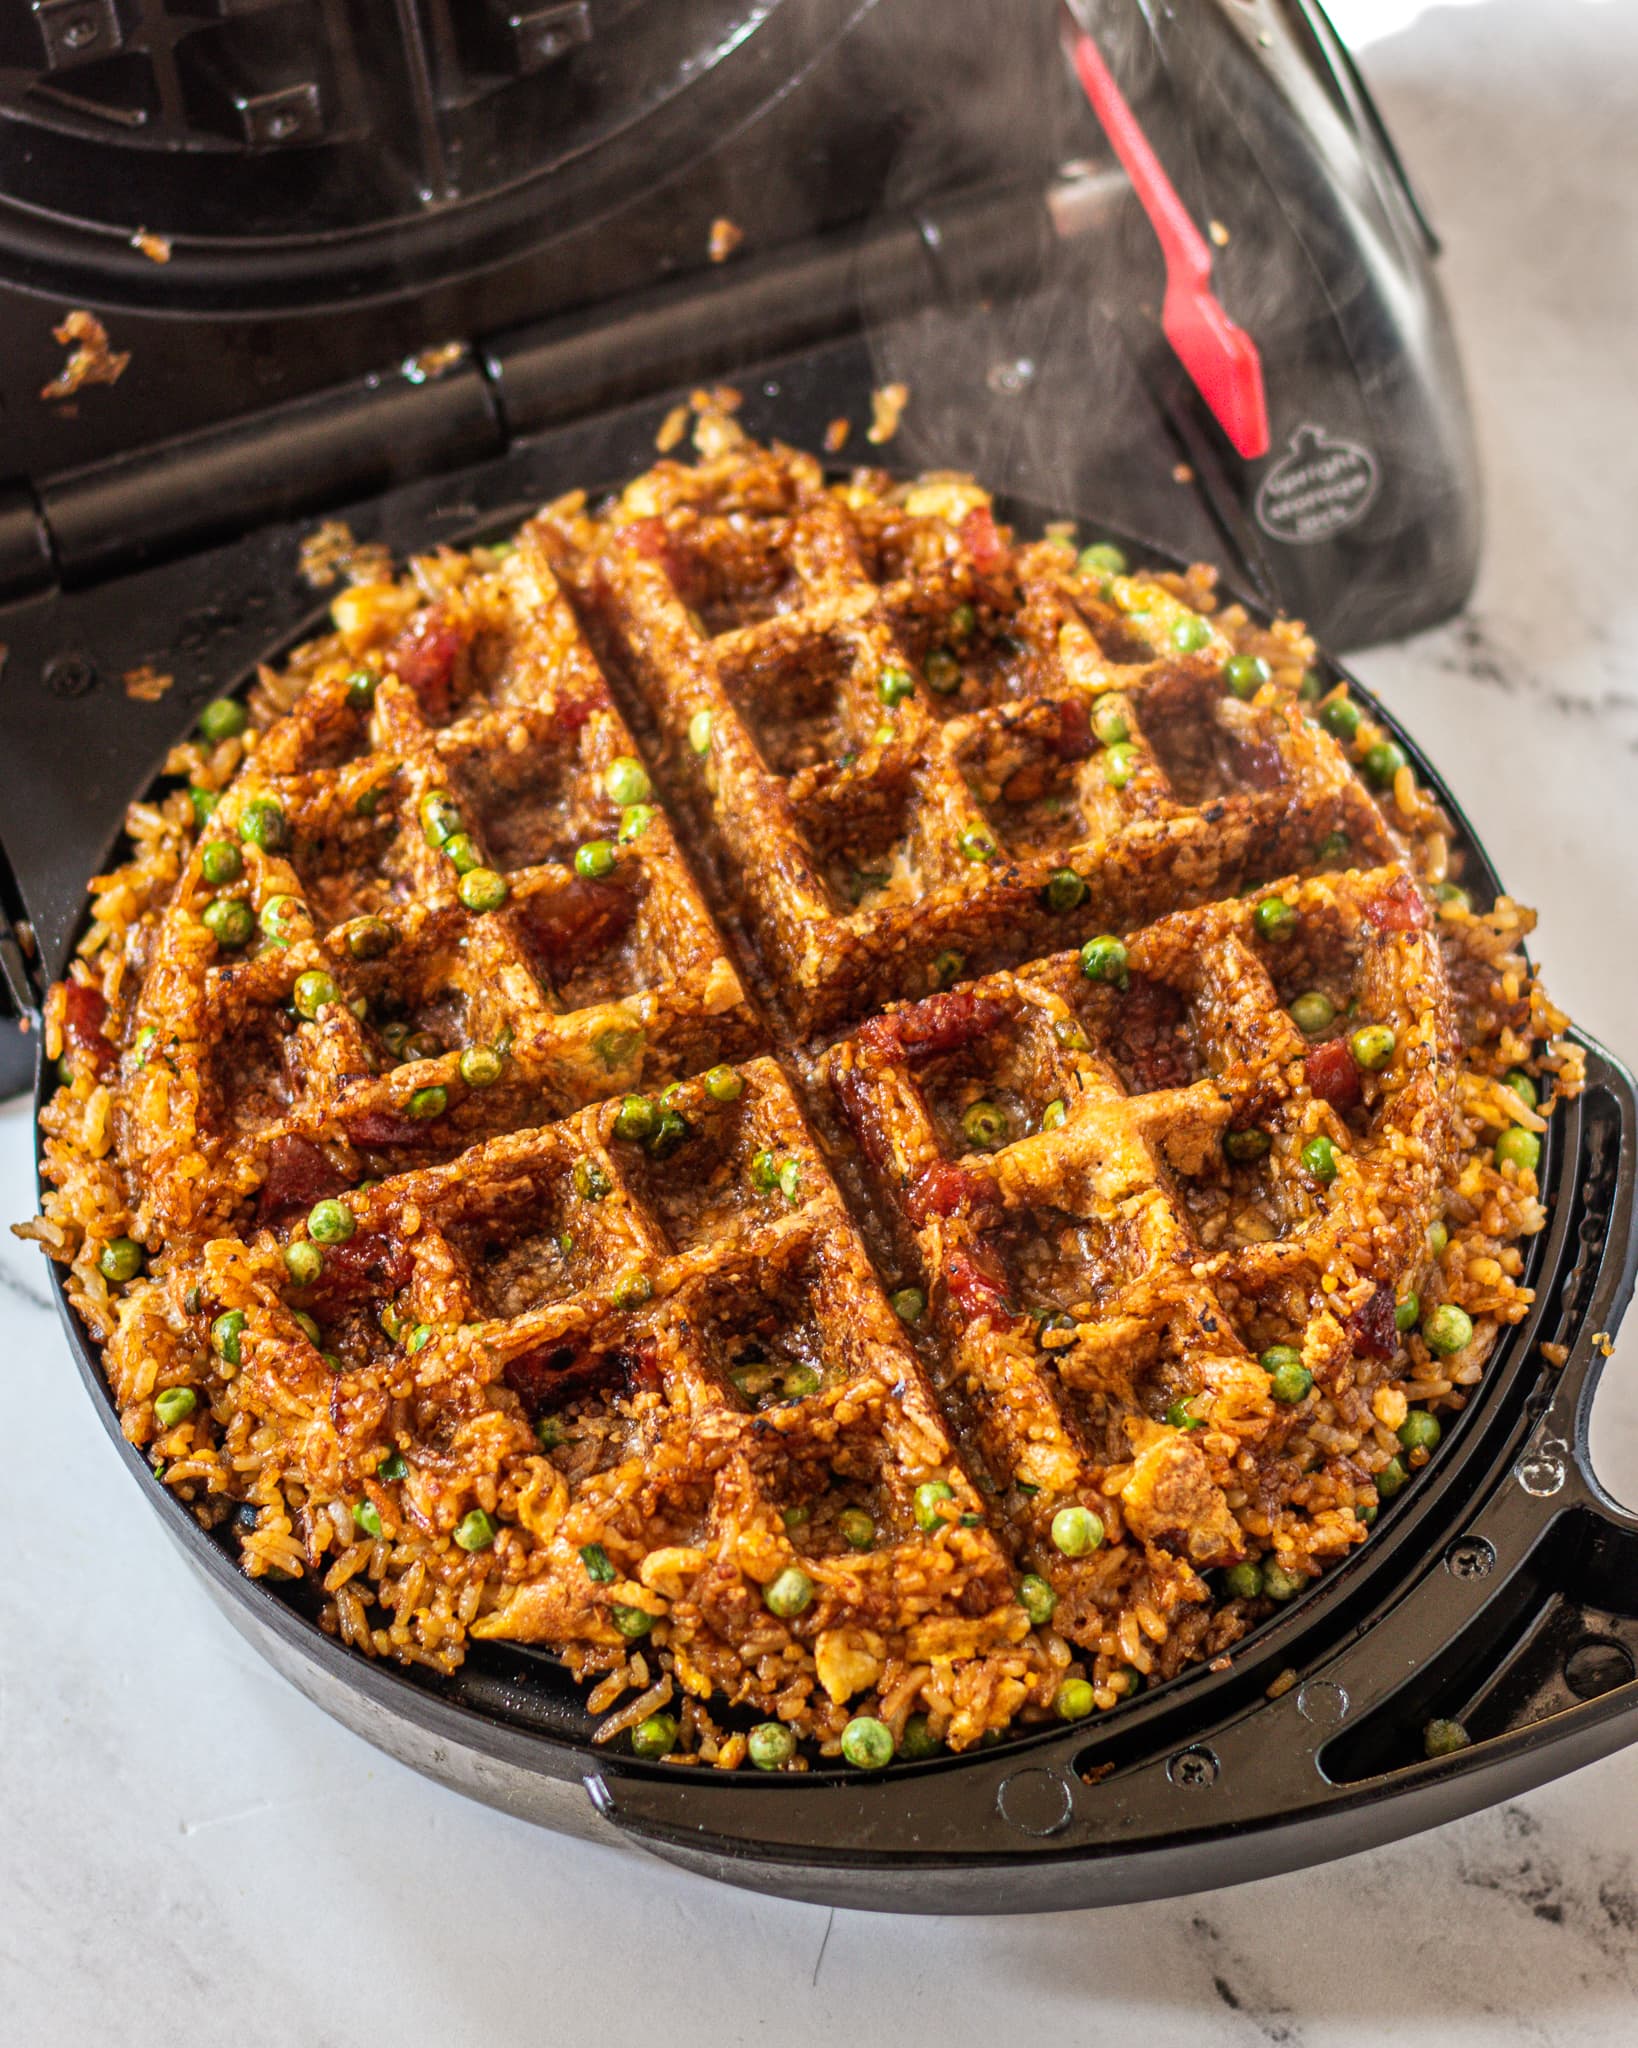 Best Waffle Makers on : Great Waffle Makers to Buy - Thrillist